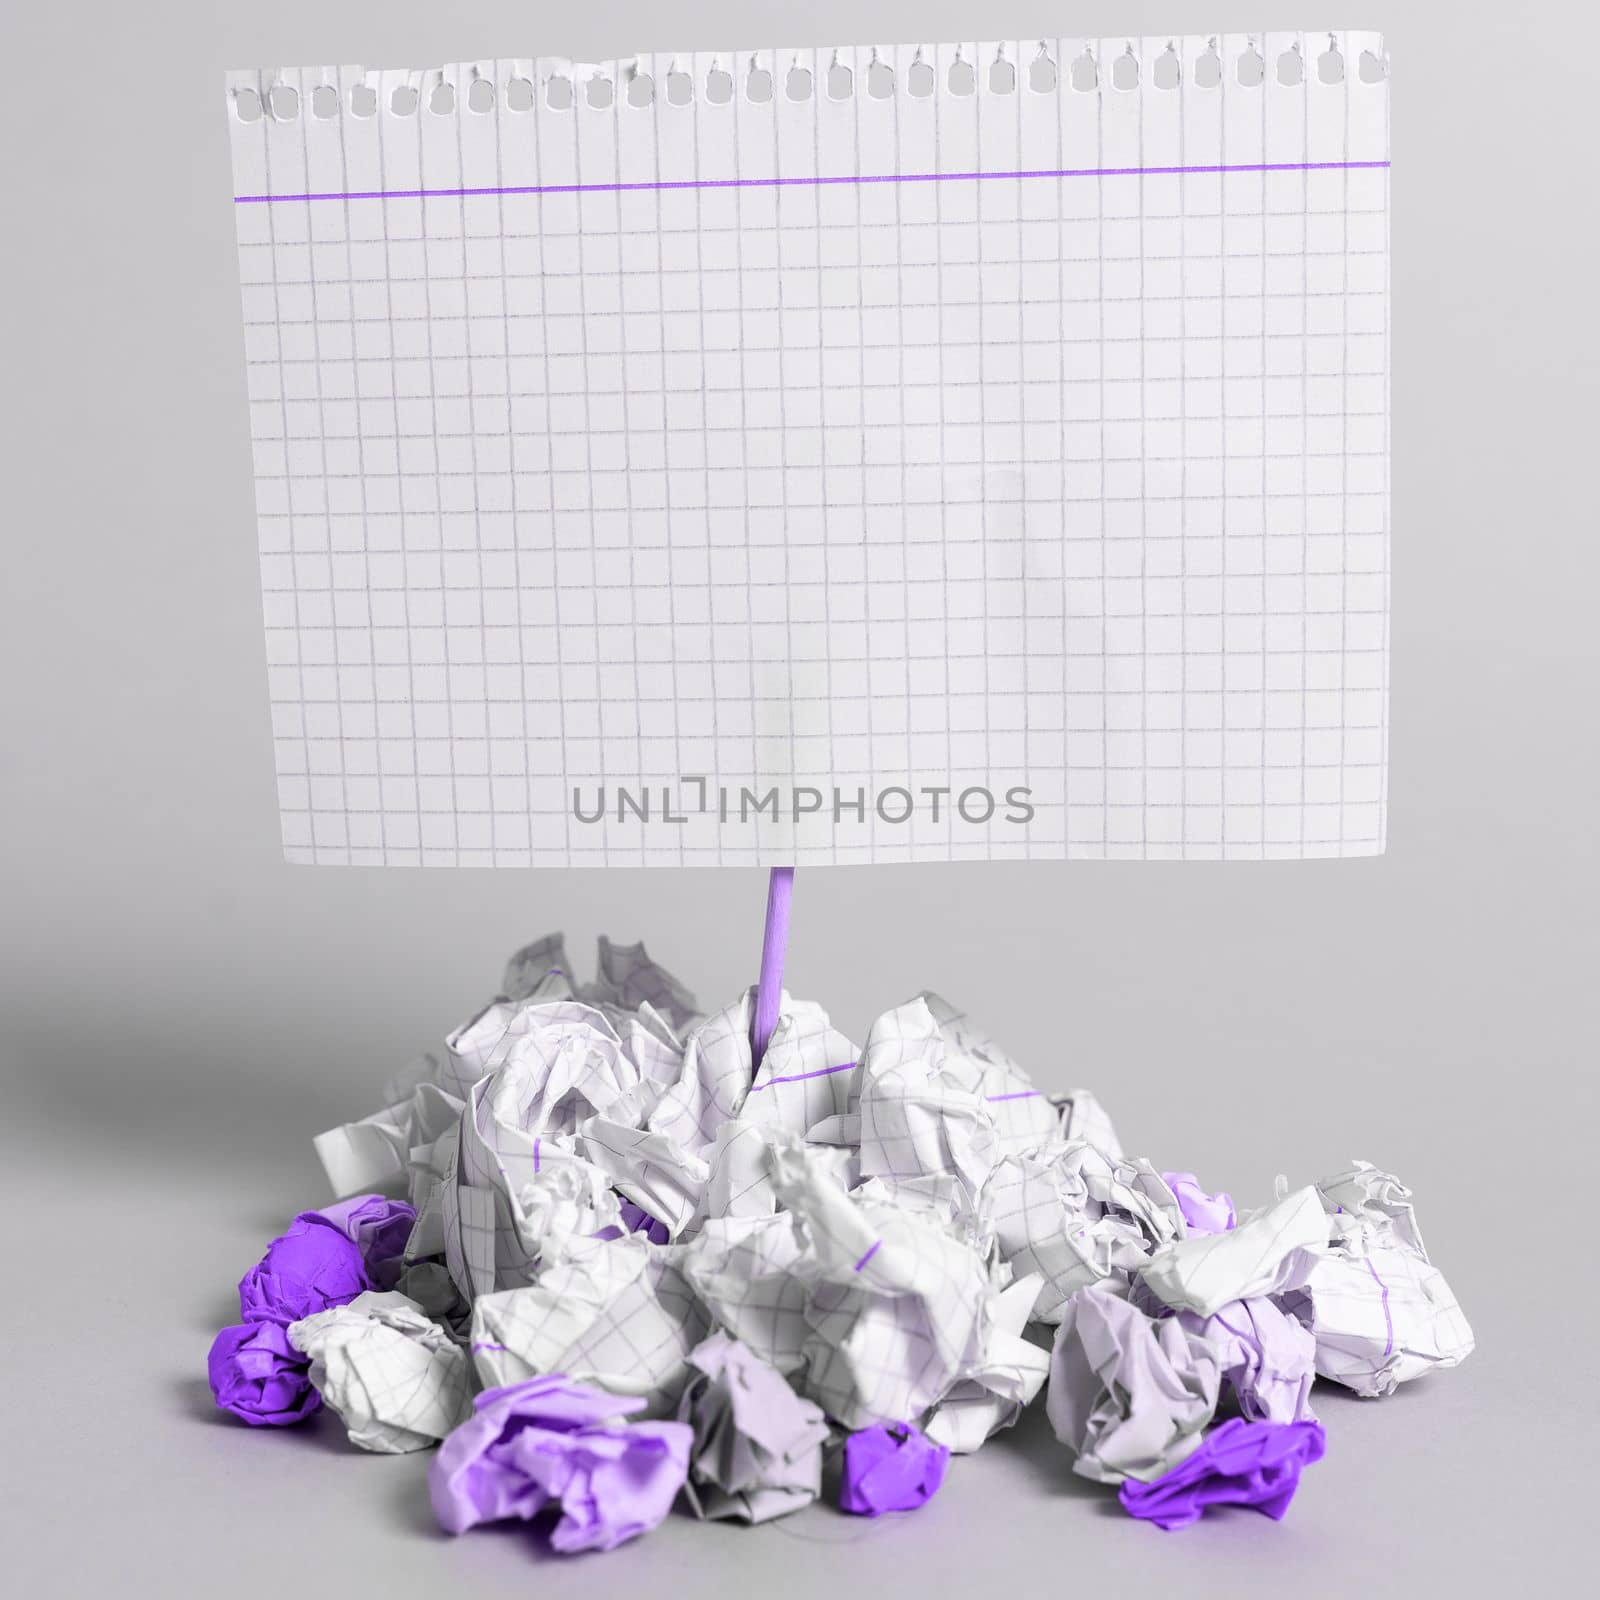 Paper Wraps Placed Around Important Information. Wrinkled Notes Arranged In Circle With Crutial Announcement Inside. Crumpled Memos With Critical Data In. by nialowwa